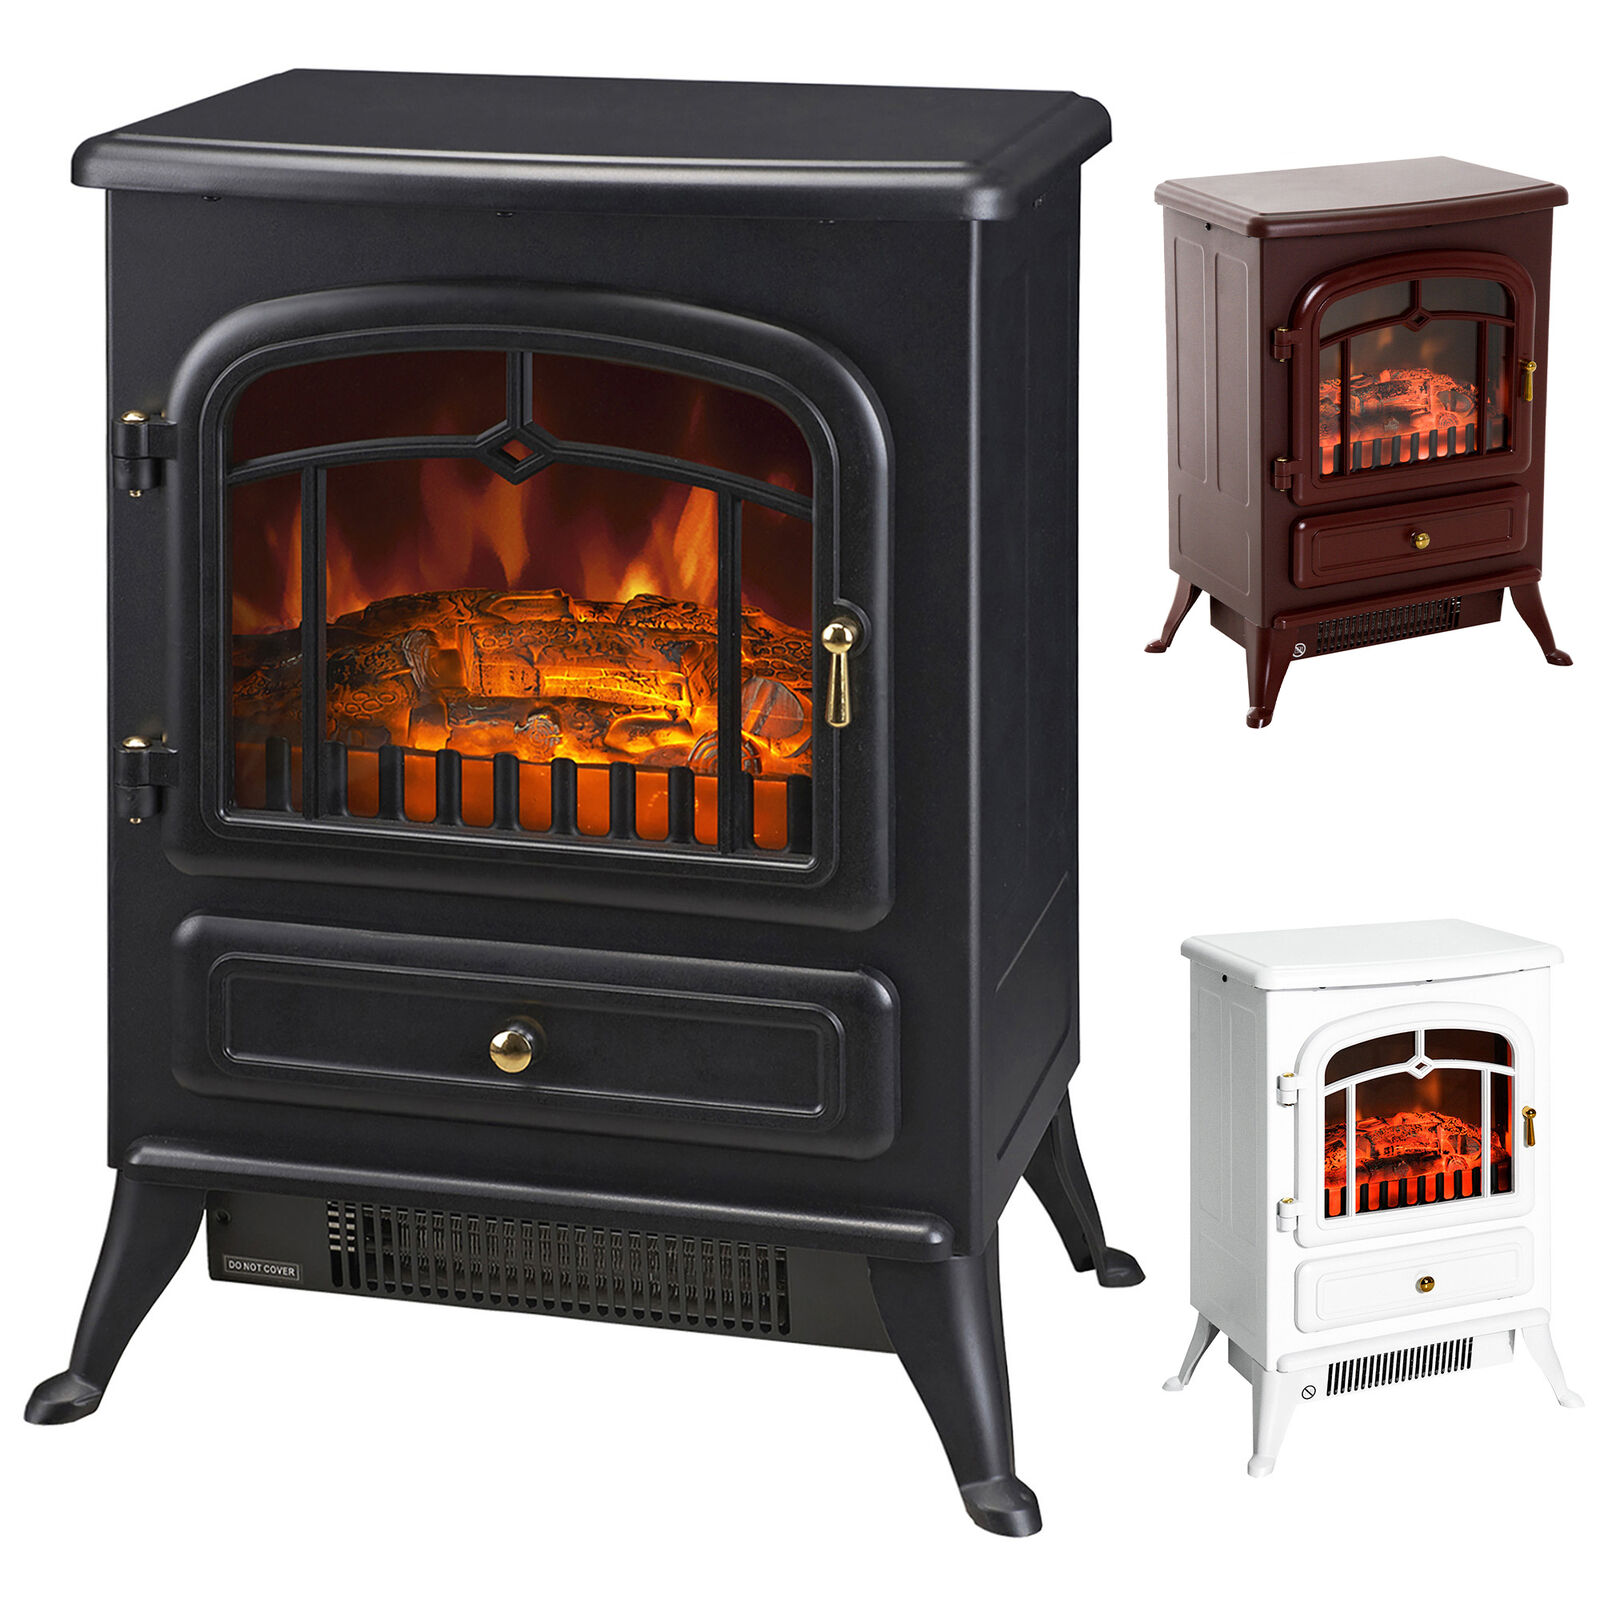 750/1500W Portable Electric Fireplace Stove Heater Adjustable LED Flames